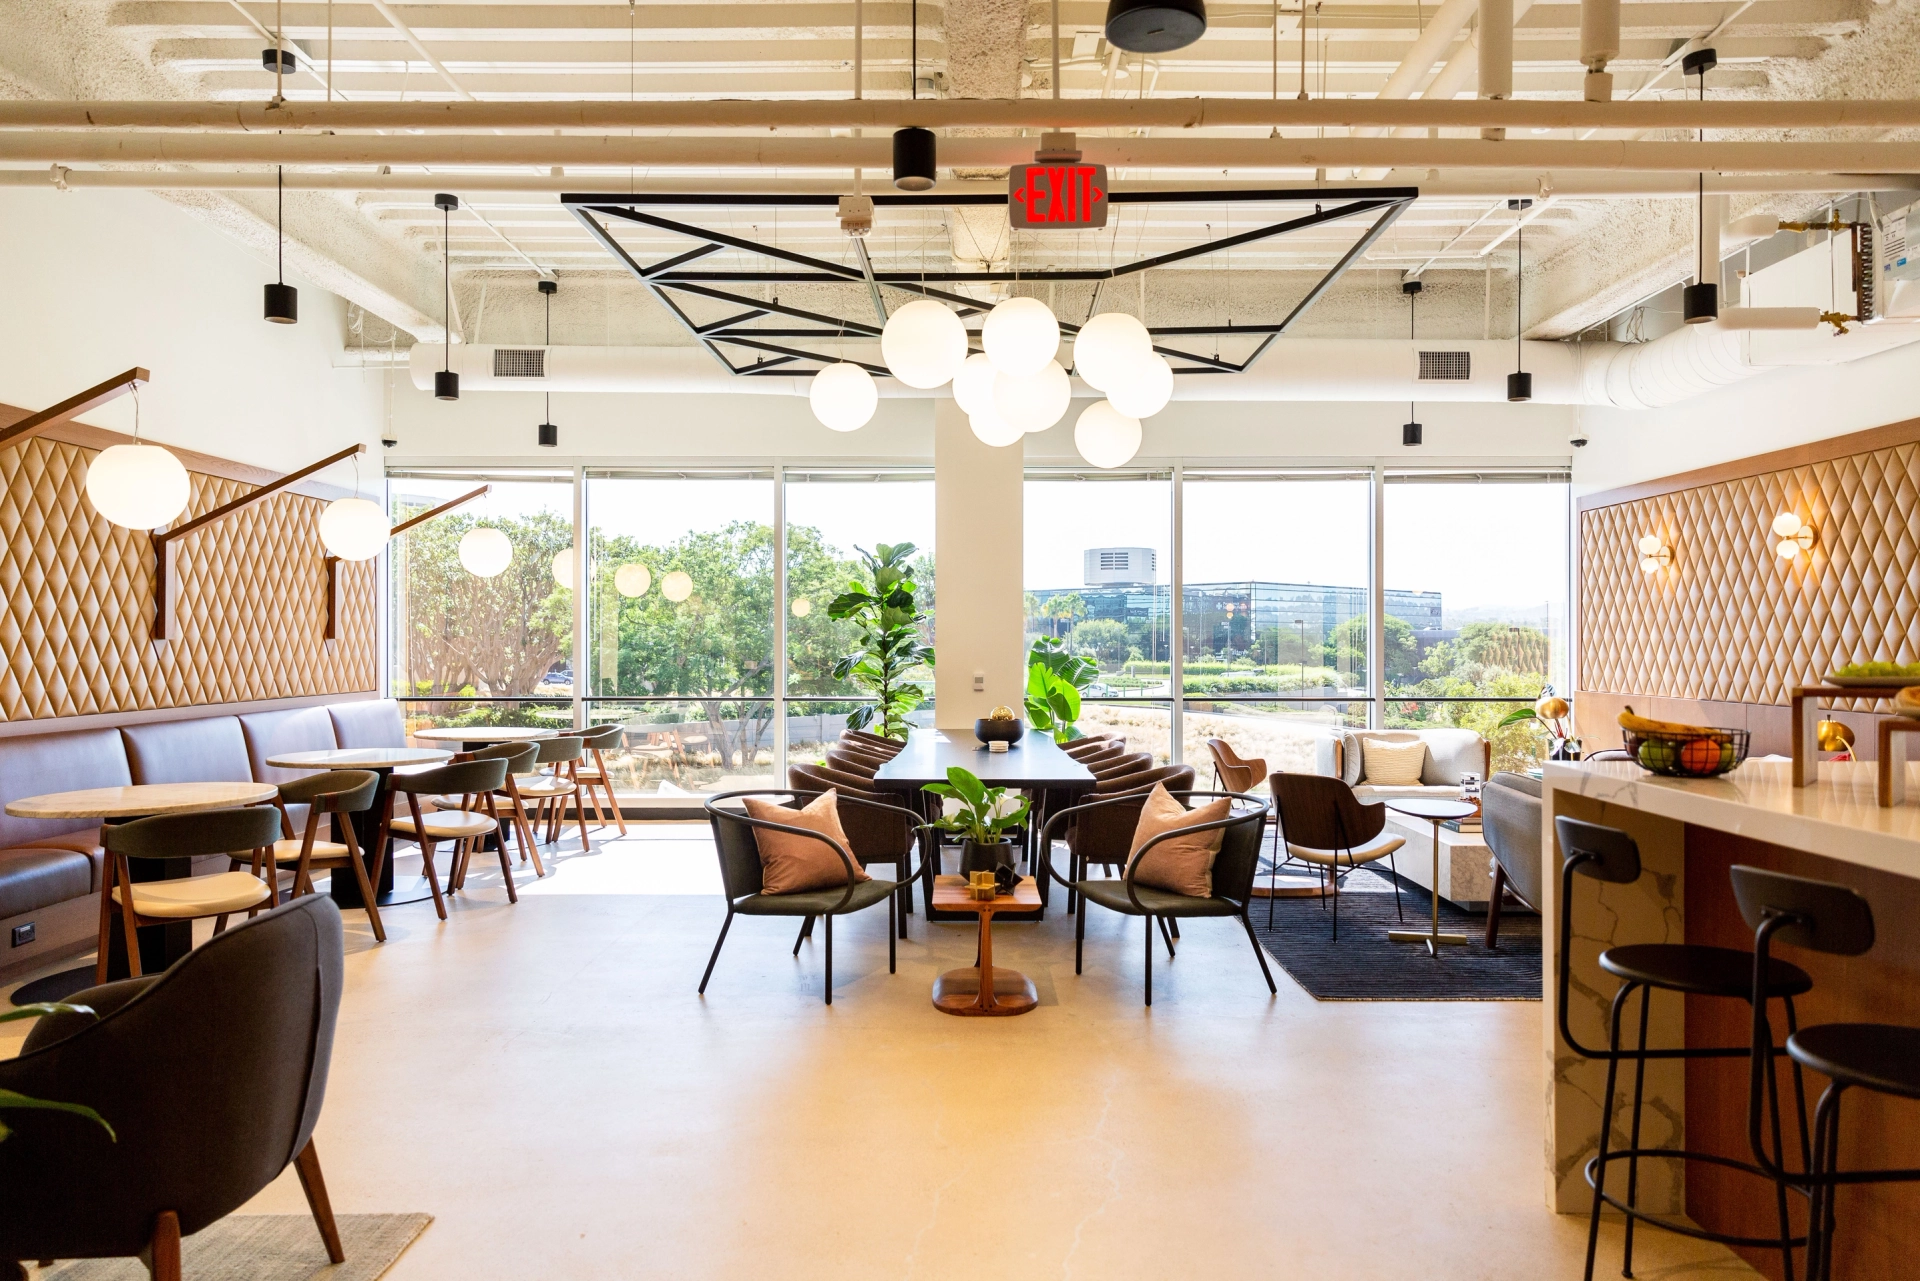 A restaurant in Irvine with tables, chairs, and a meeting room available for coworking.